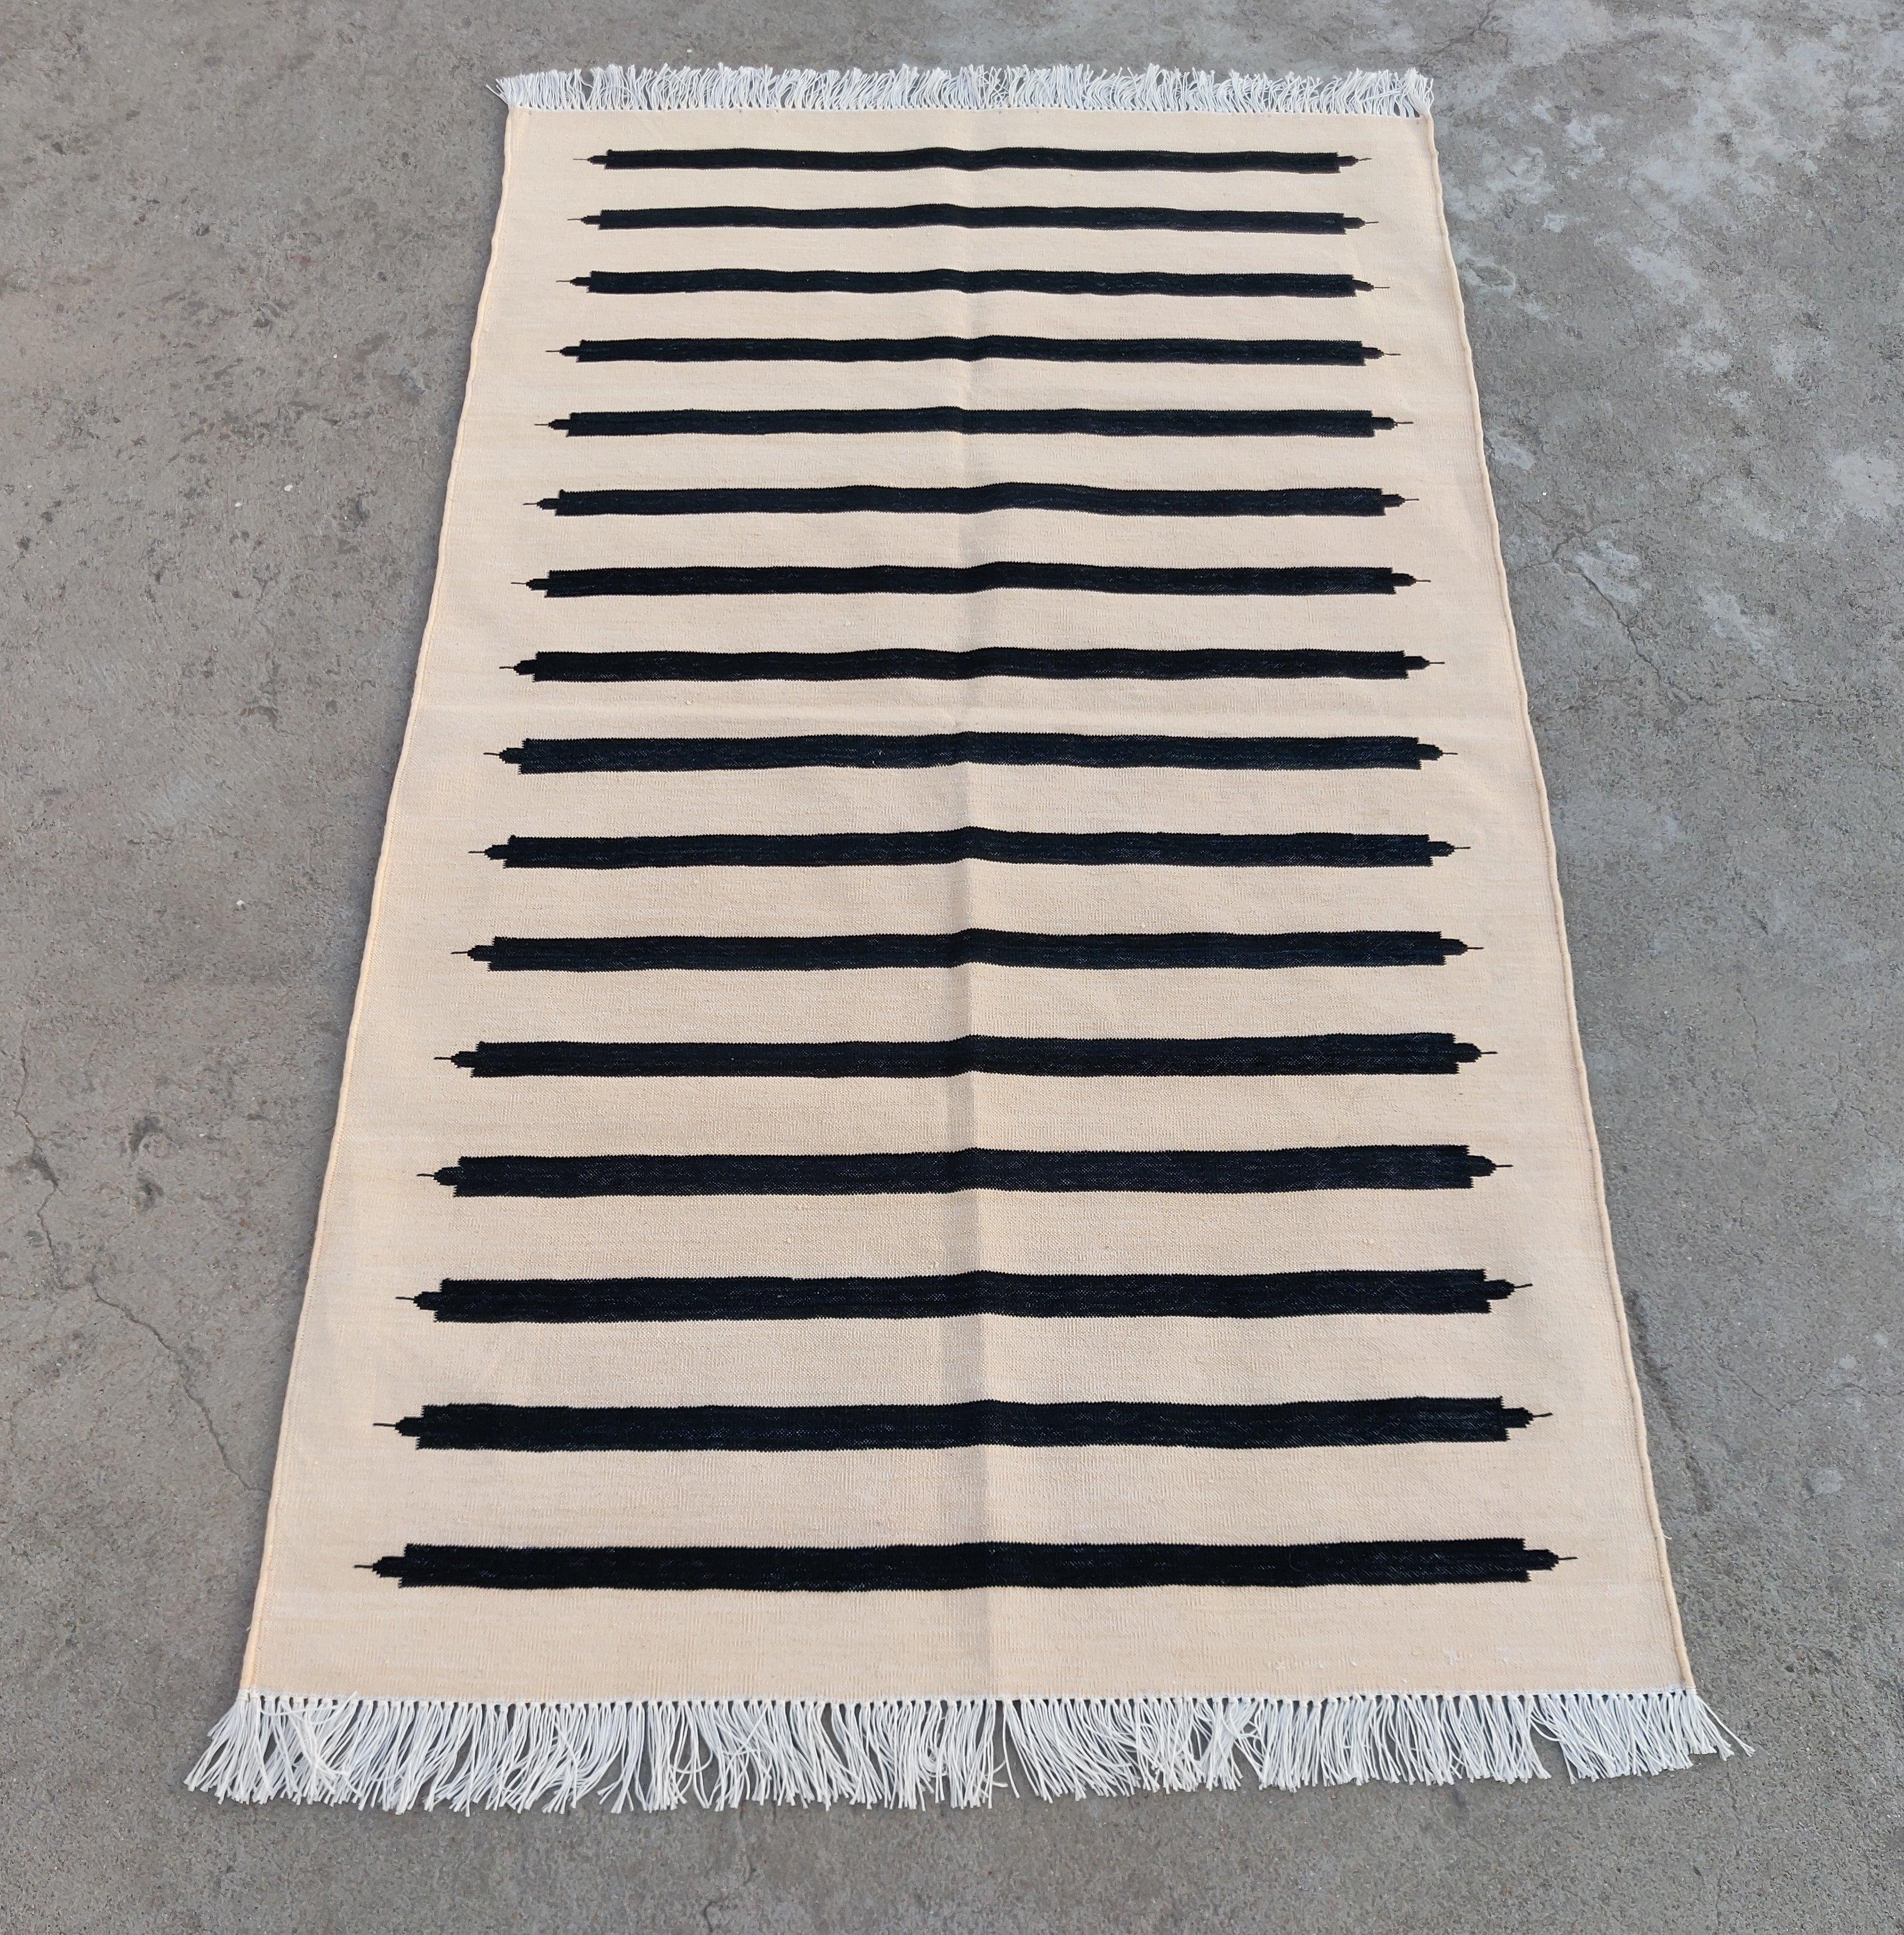 Hand-Woven Handmade Cotton Area Flat Weave Rug, 3x5 Cream And Black Striped Indian Dhurrie For Sale